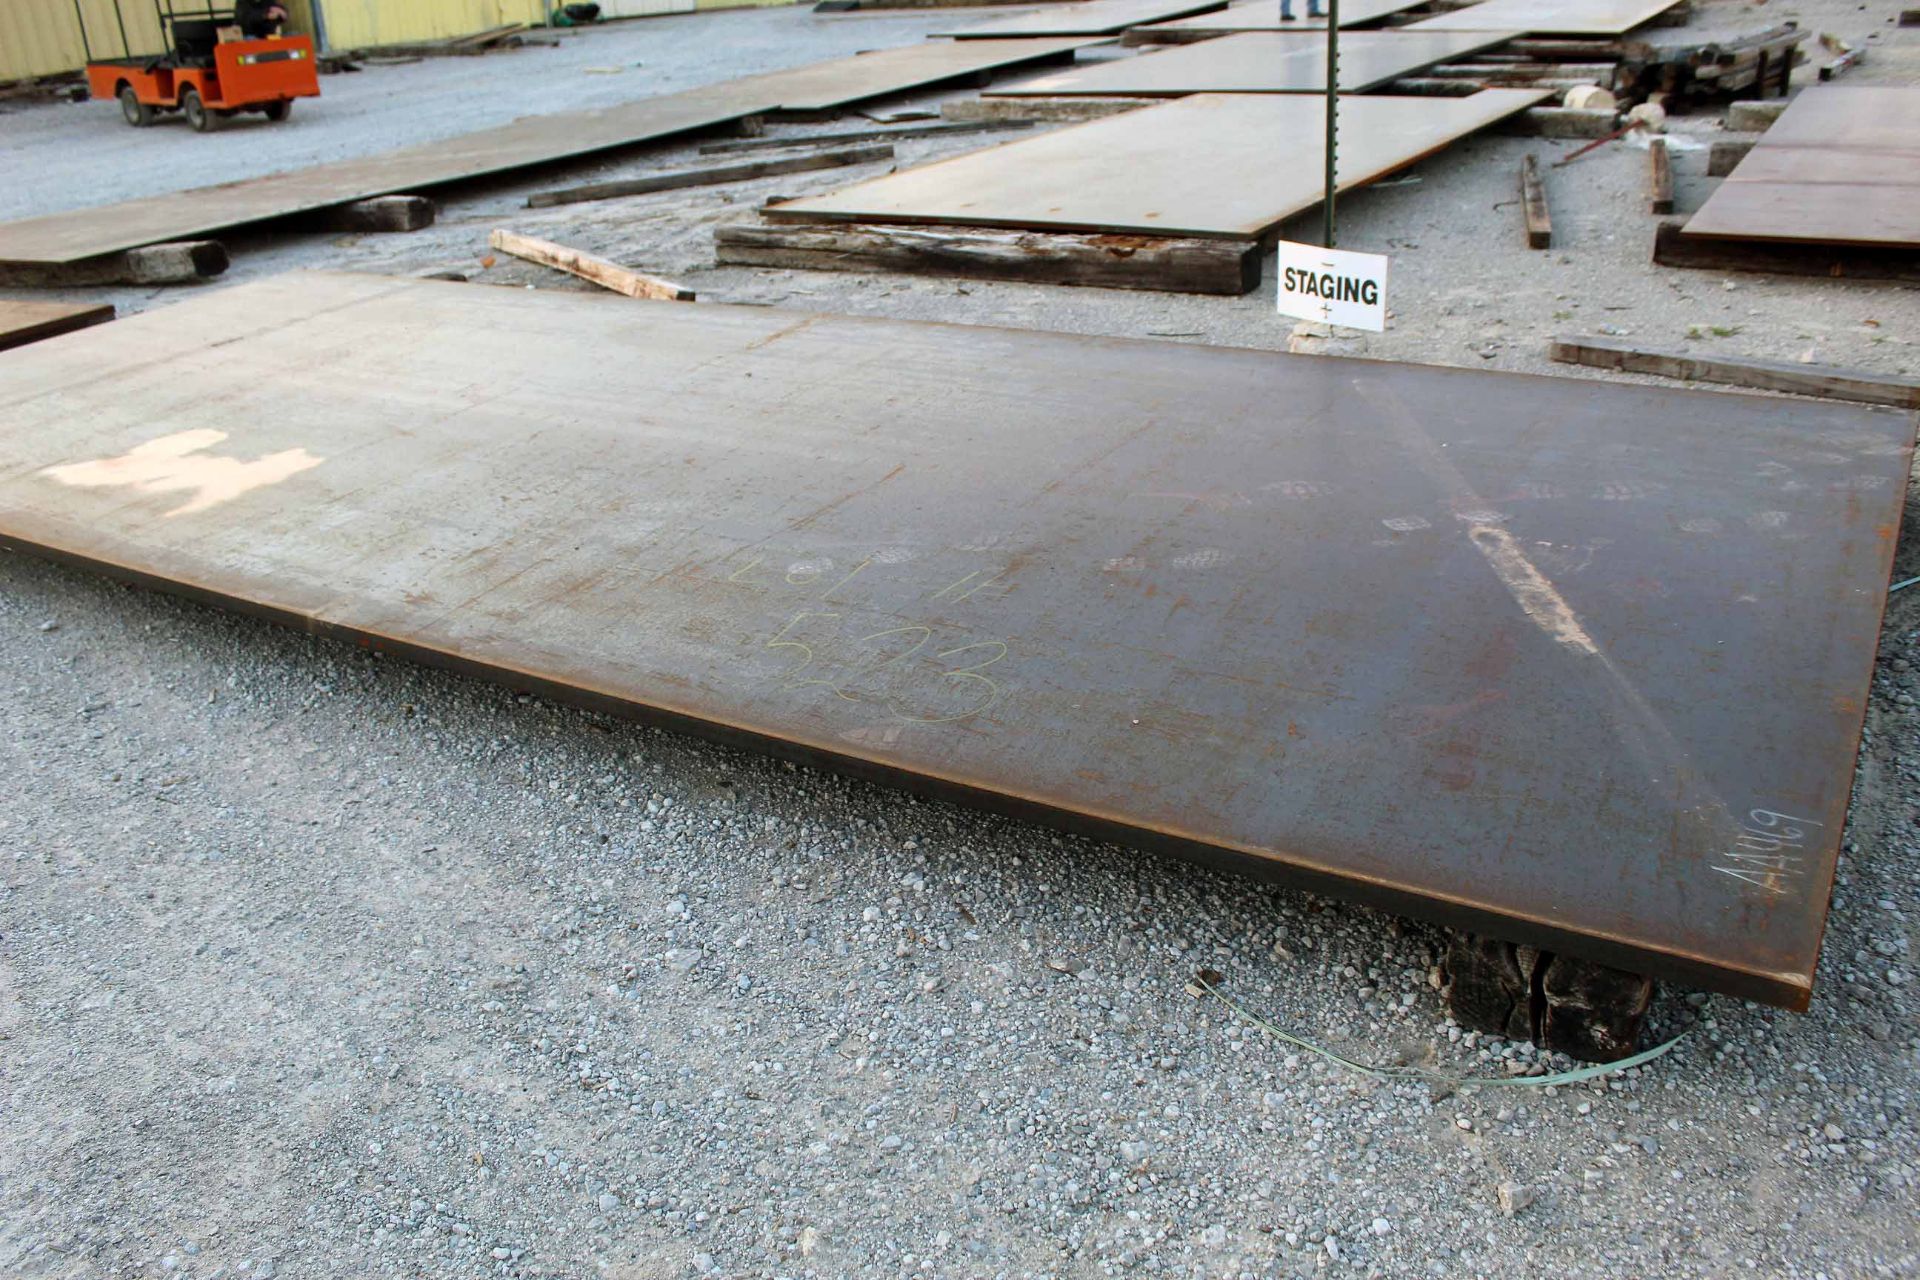 COMPLETE PLATE, 20' x 8' x 1-1/2" thk.